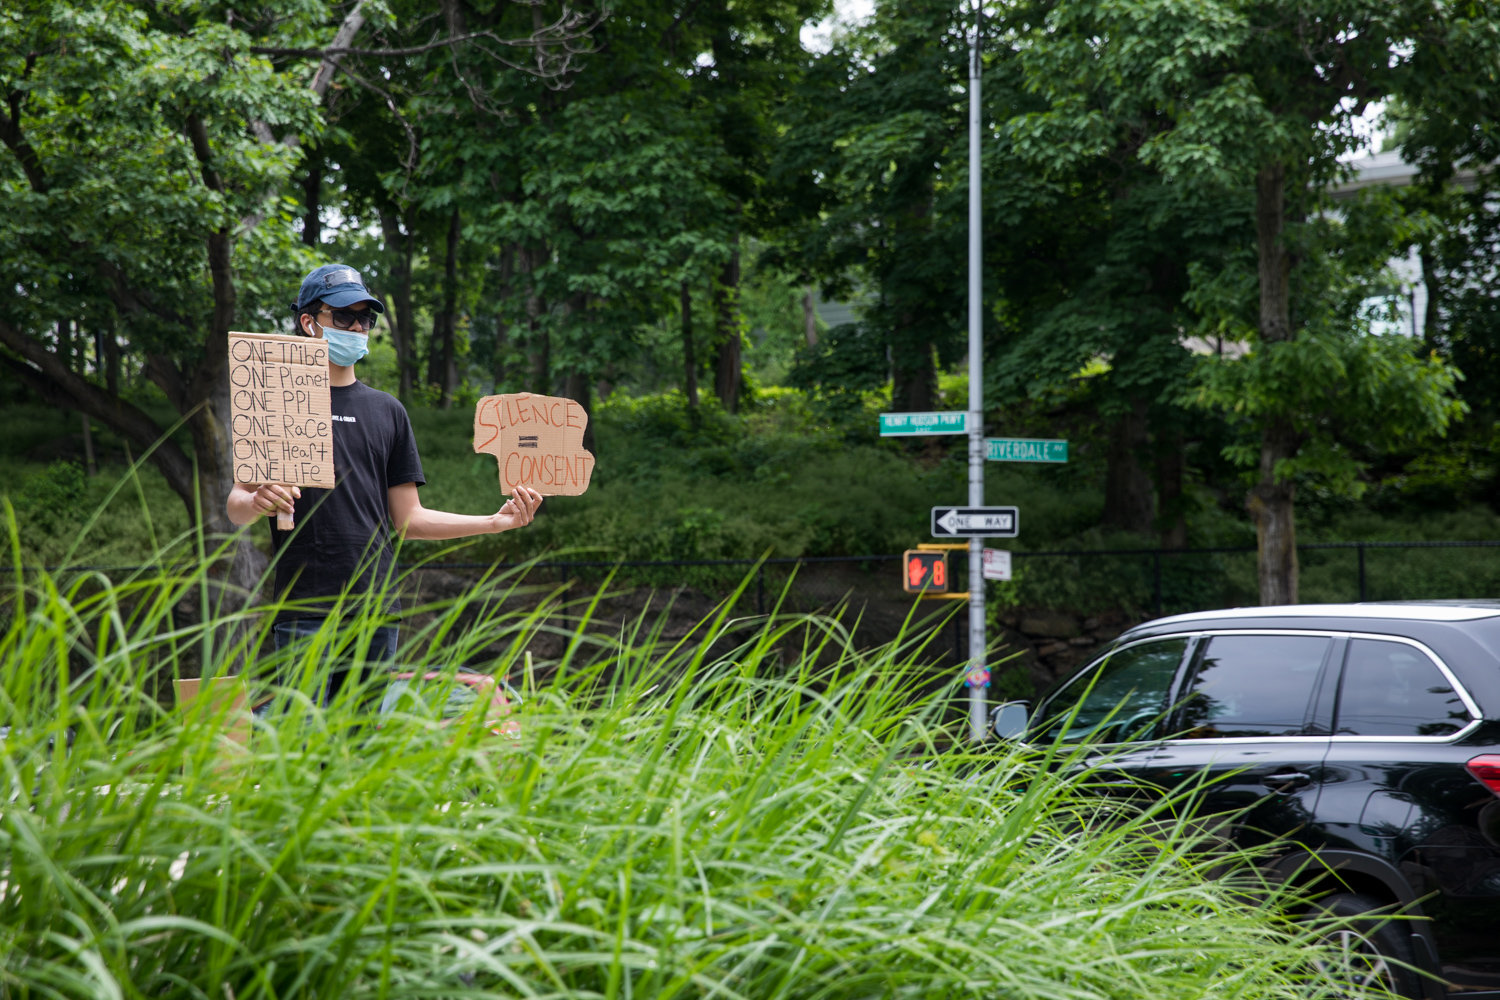 A car passes by the Riverdale Monument as James Cortez holds up signs in support of the Black Lives Matter movement. It was part of an ongoing vigil, organized following the police-involved death of George Floyd in Minneapolis, allowing people 20-minute shifts in the community center, to accommodate for coronavirus social distancing.